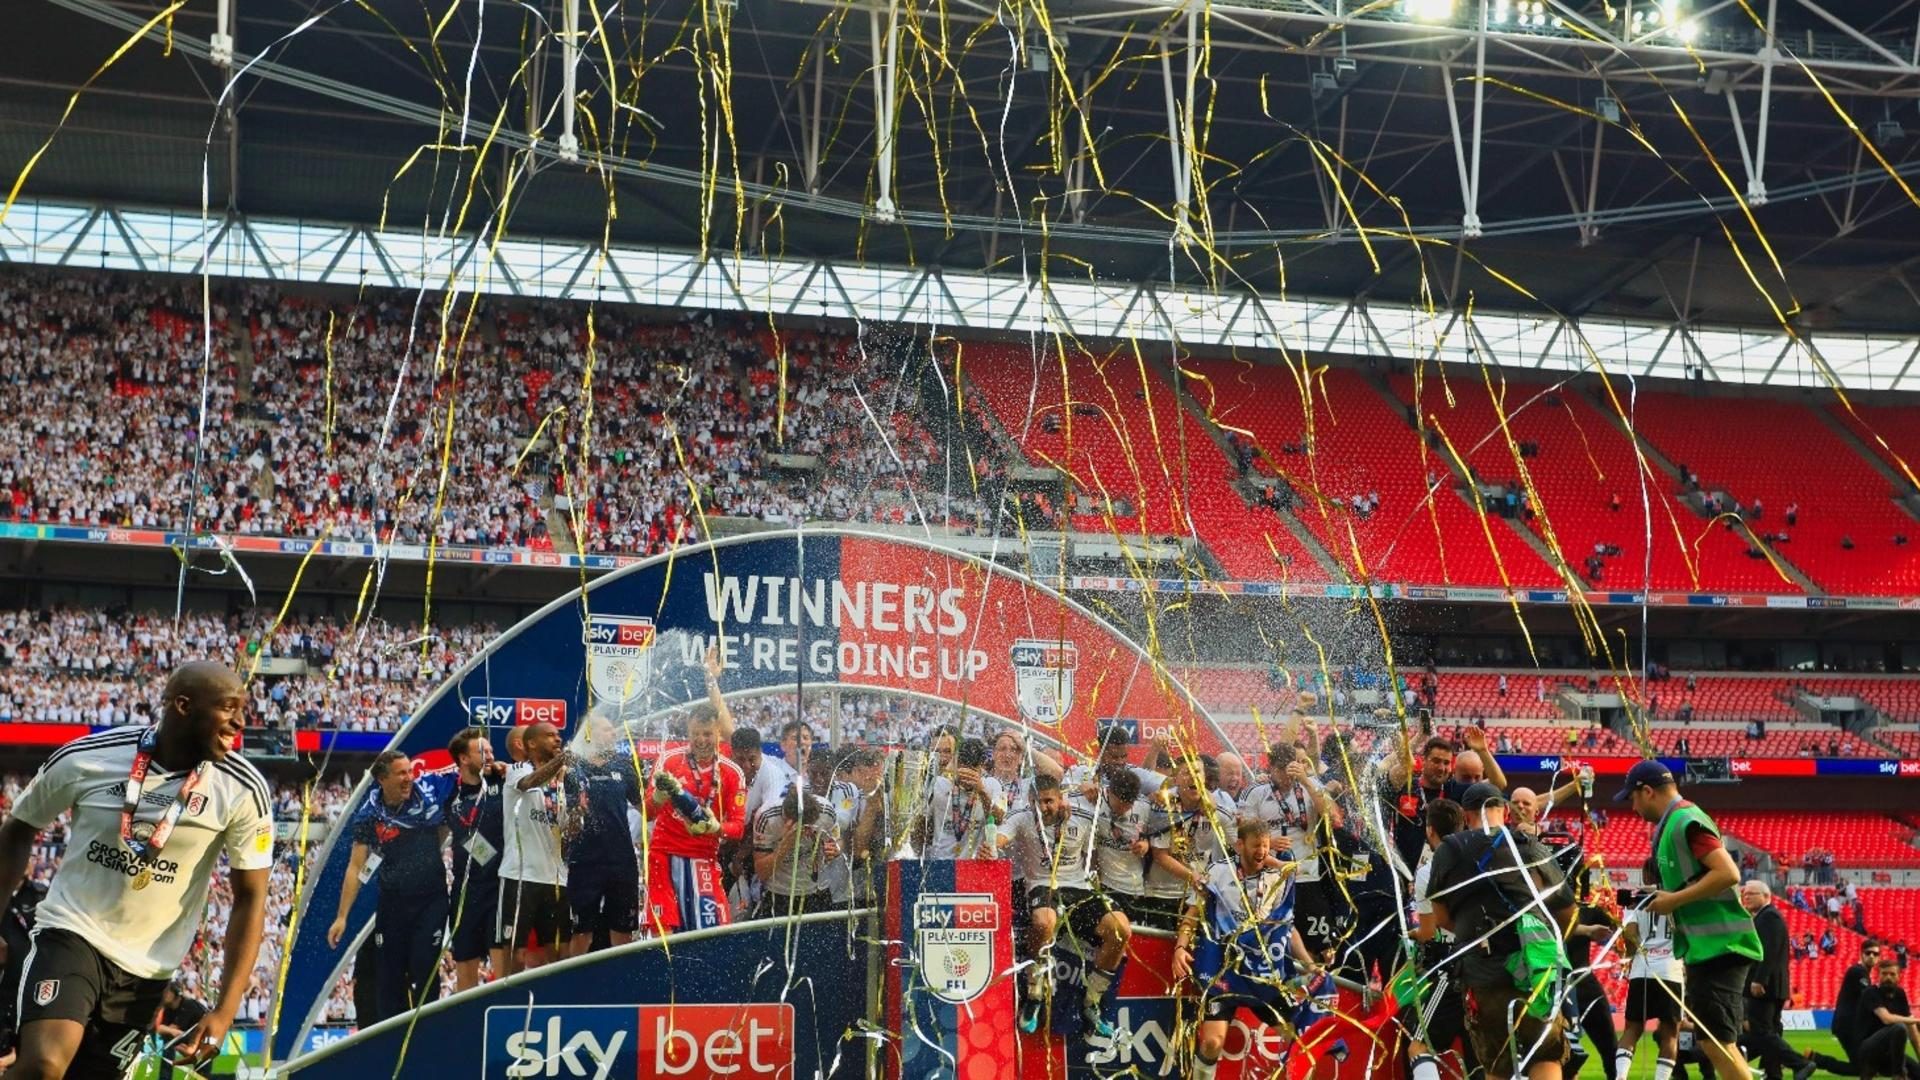 Championship play-offs 2021: Fixtures, dates & teams in the race